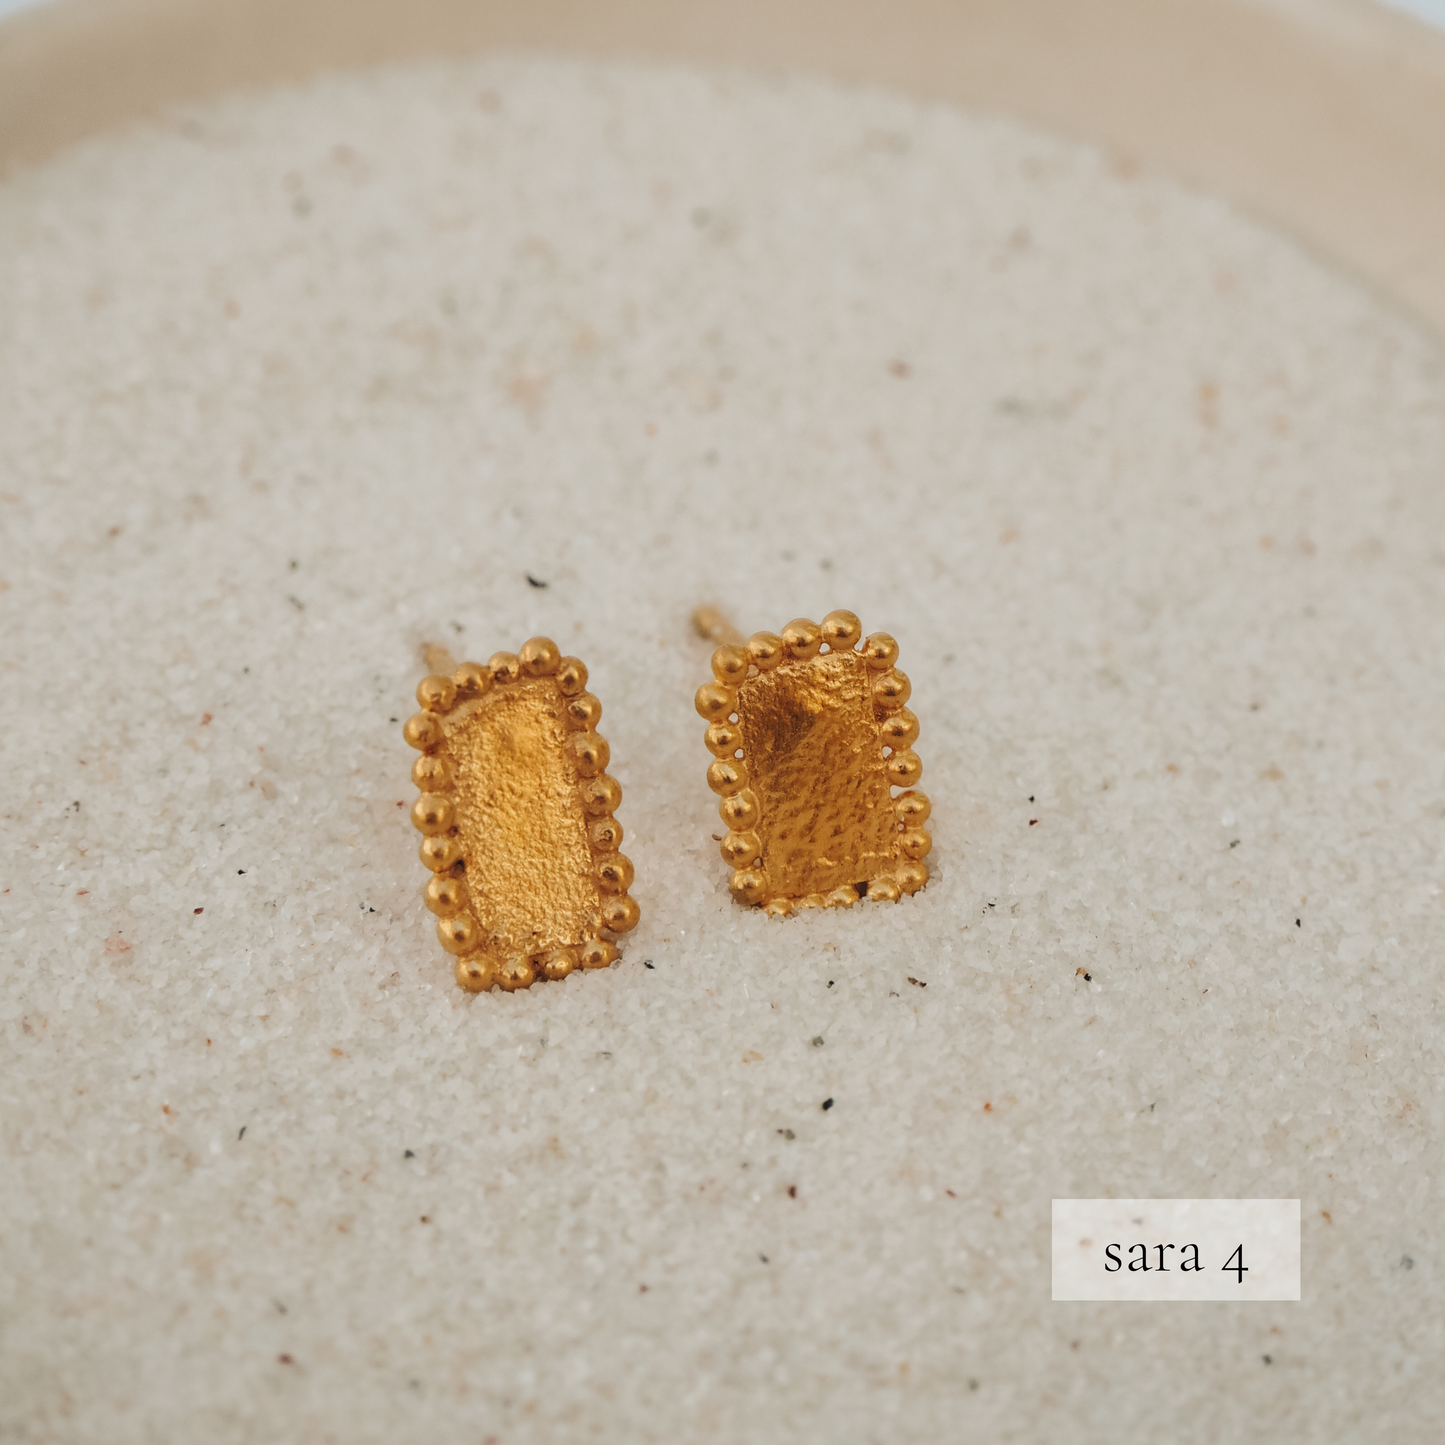 Gold stud earrings with square-shaped design and intricate granulated texture